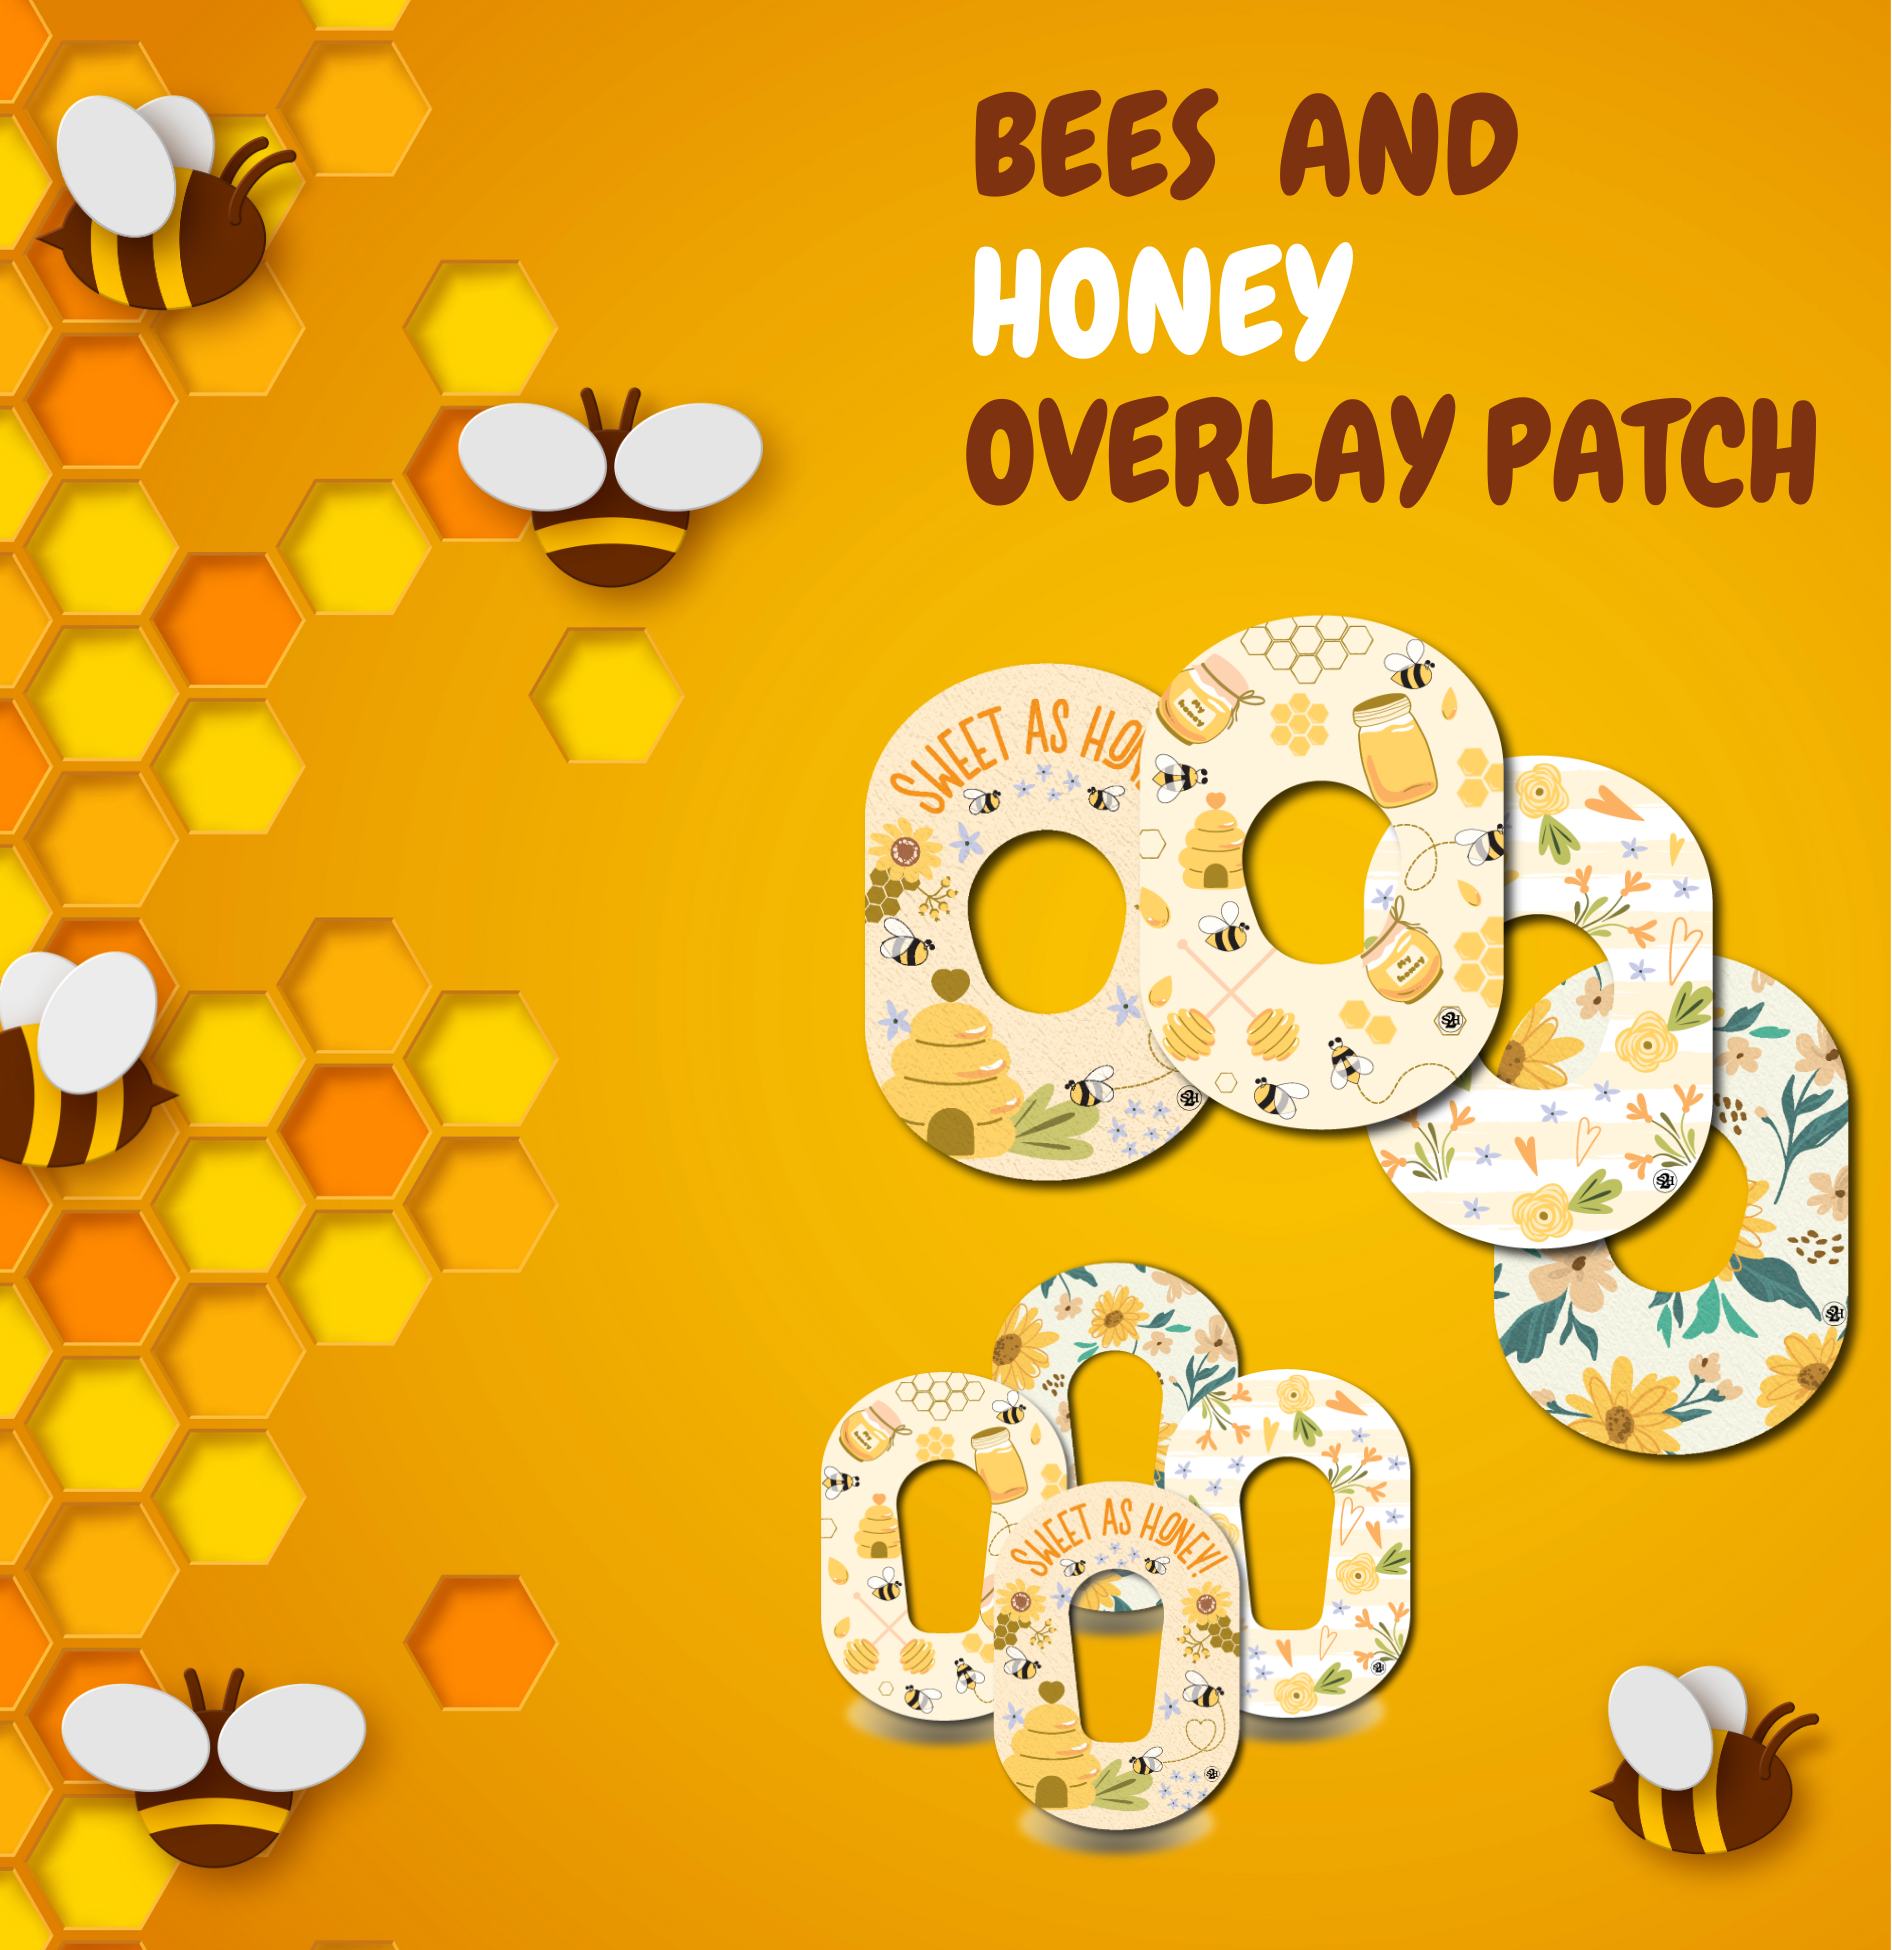 Bees and Honey Overlay Patch